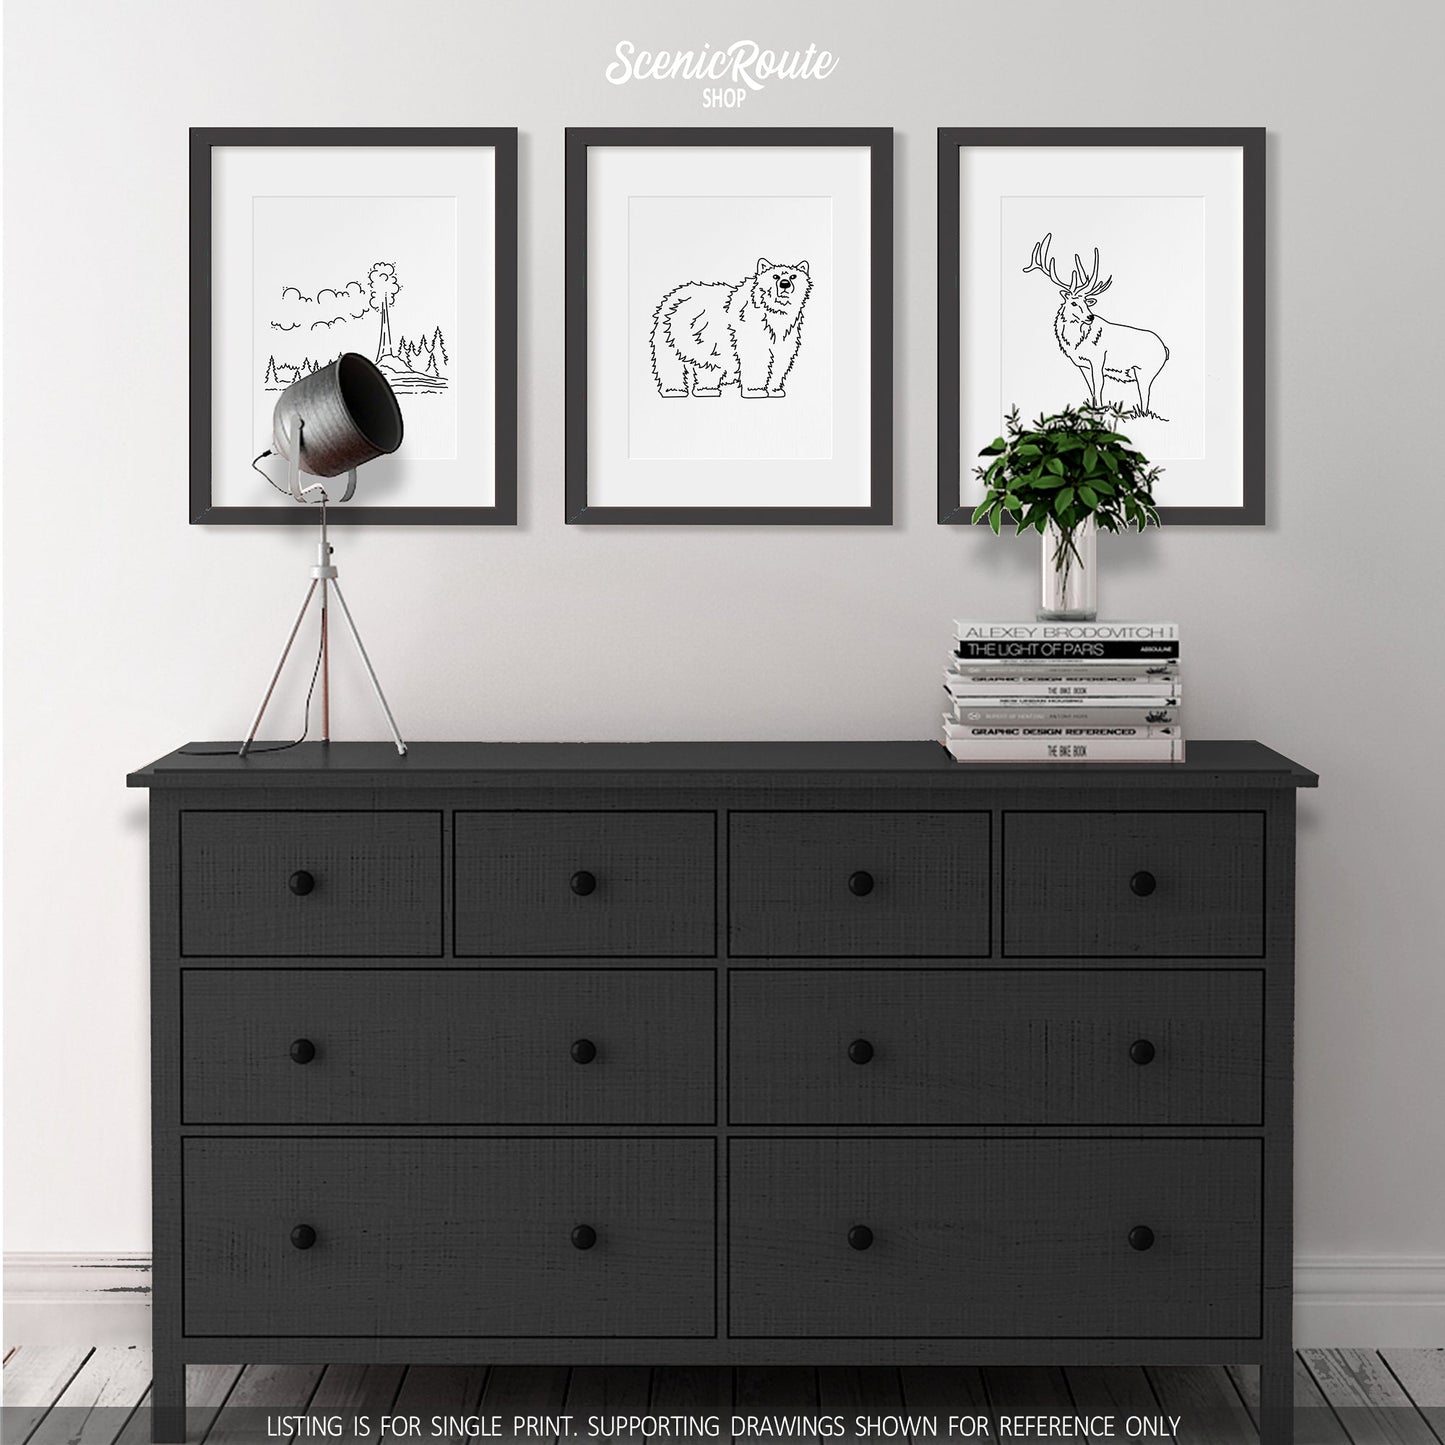 A group of three framed drawings on a wall above a dresser with books and a plant. The line art drawings include Yellowstone National Park, a Grizzly Bear, and an Elk